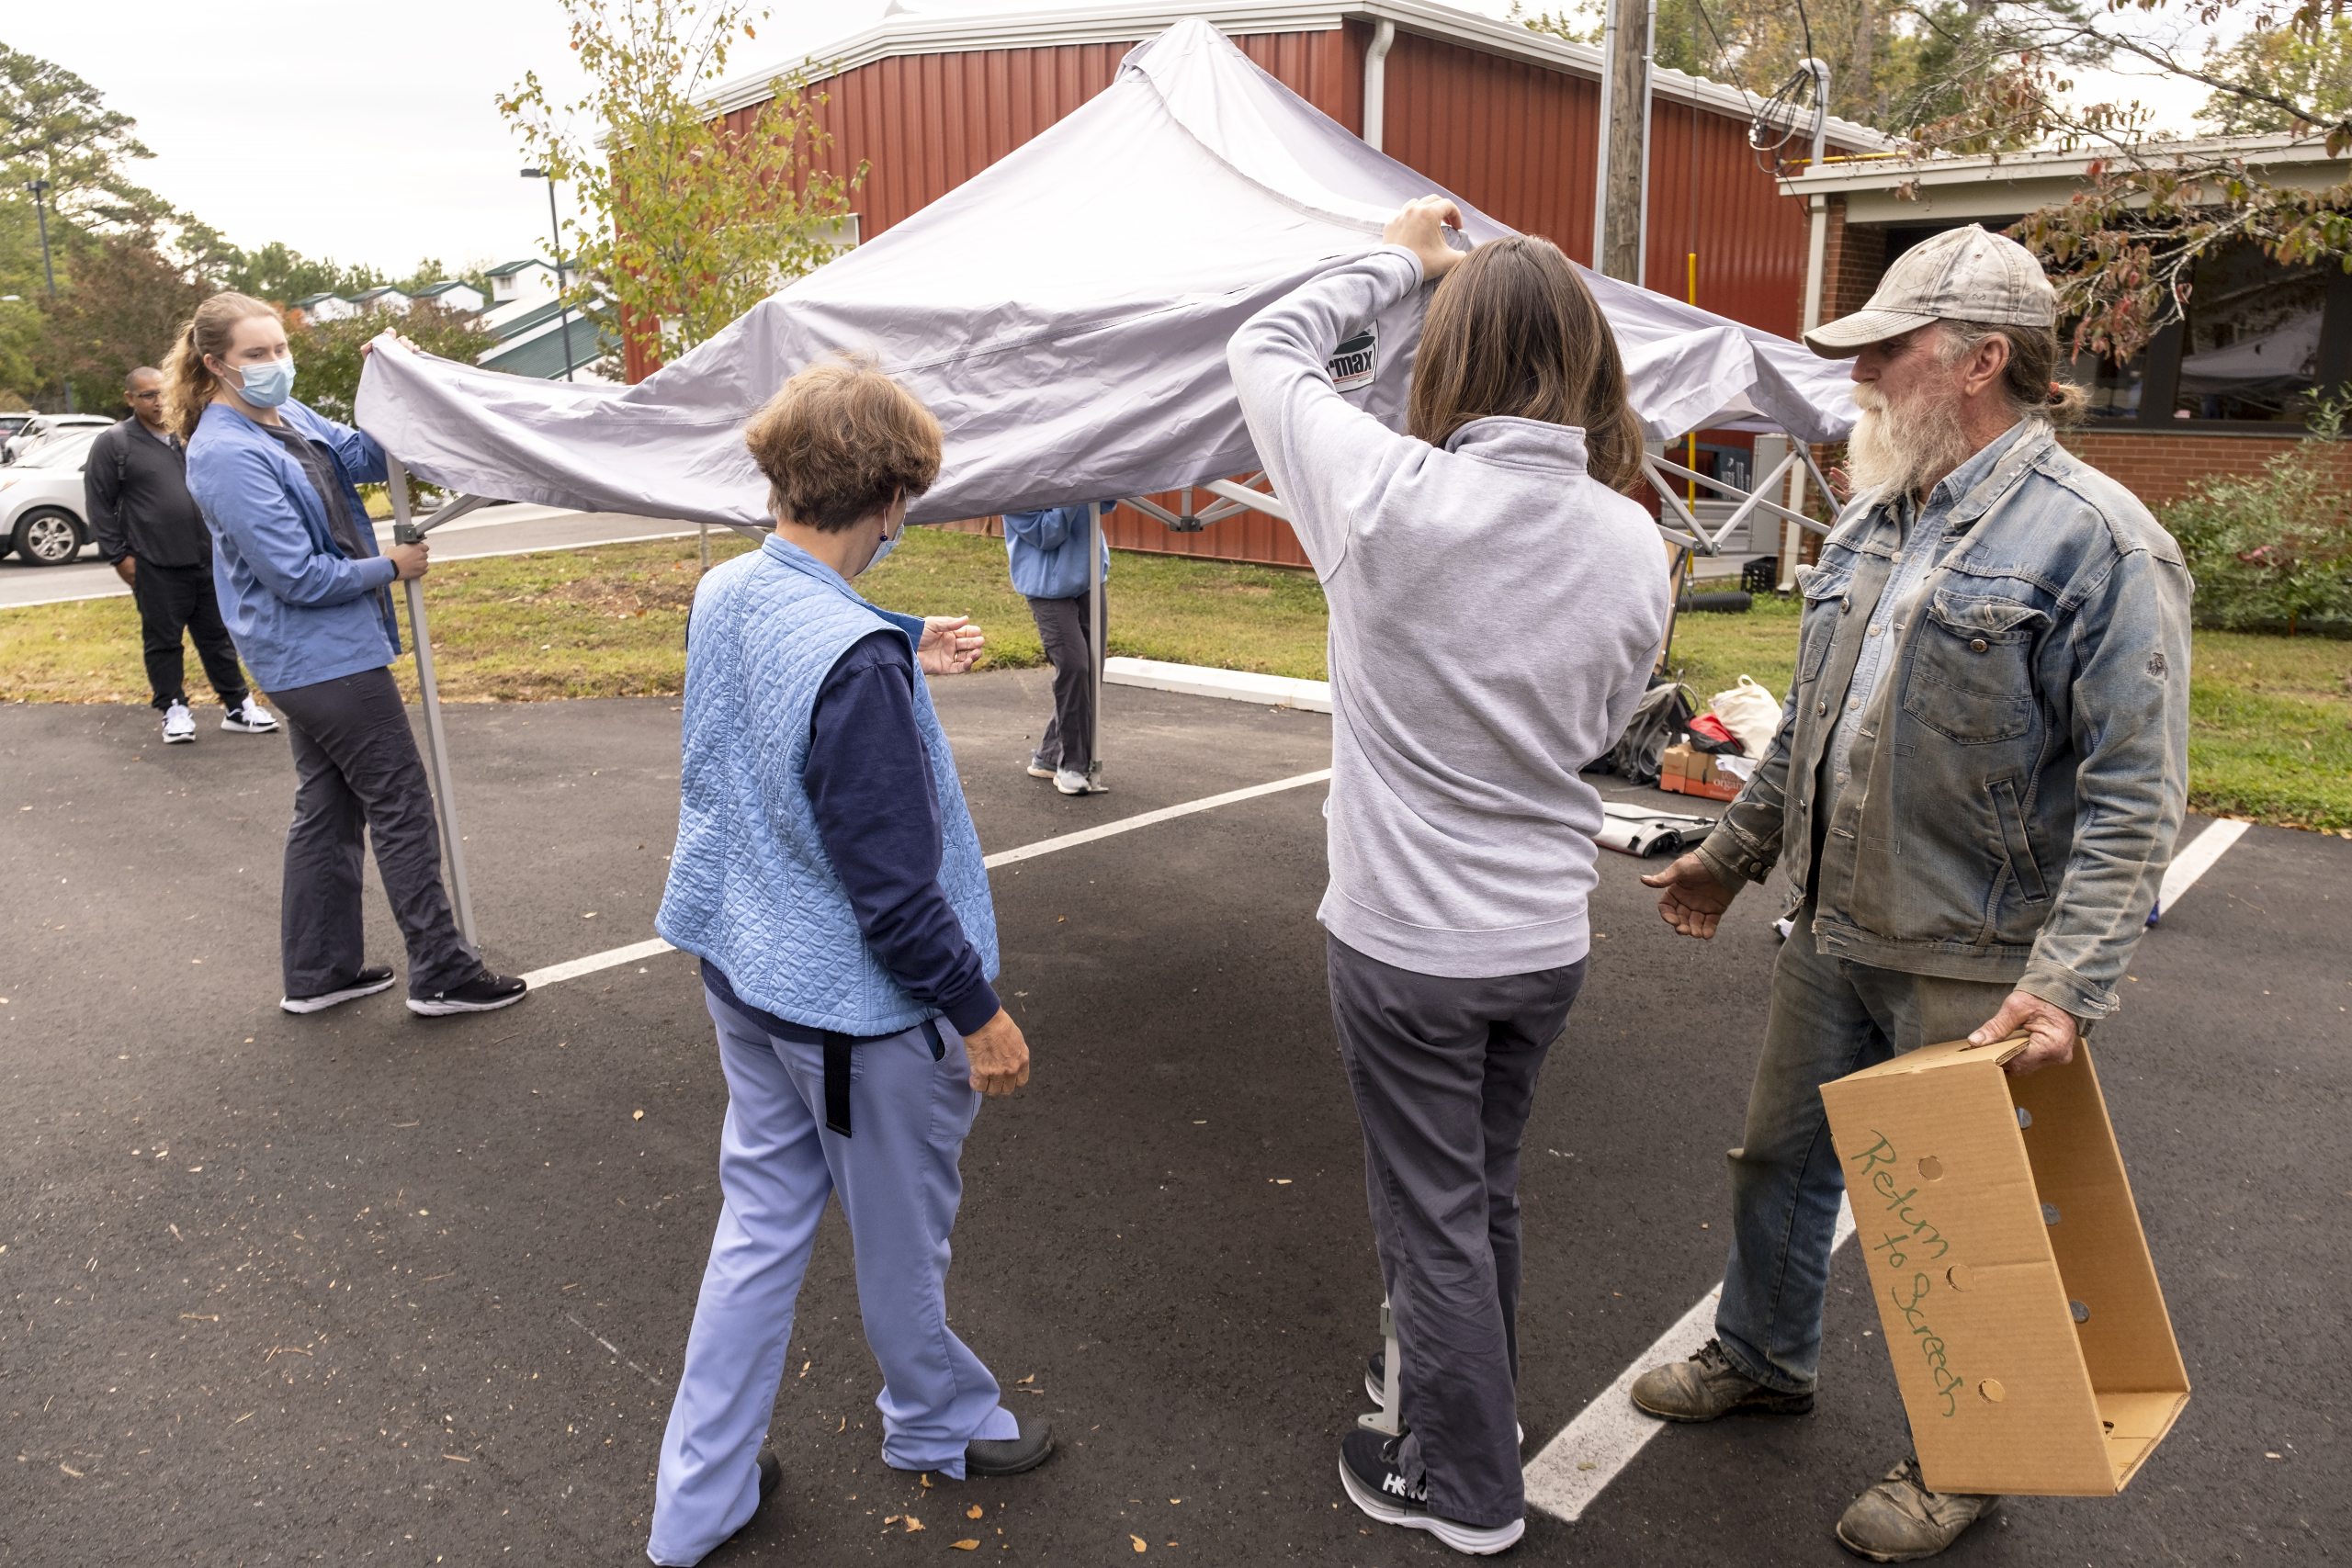 With help from a local farmer, four nursing students and Associate Professor Jean Davison are put up a tent under which students can perform health assessments that might indicate a health problem such depression or diabetes.